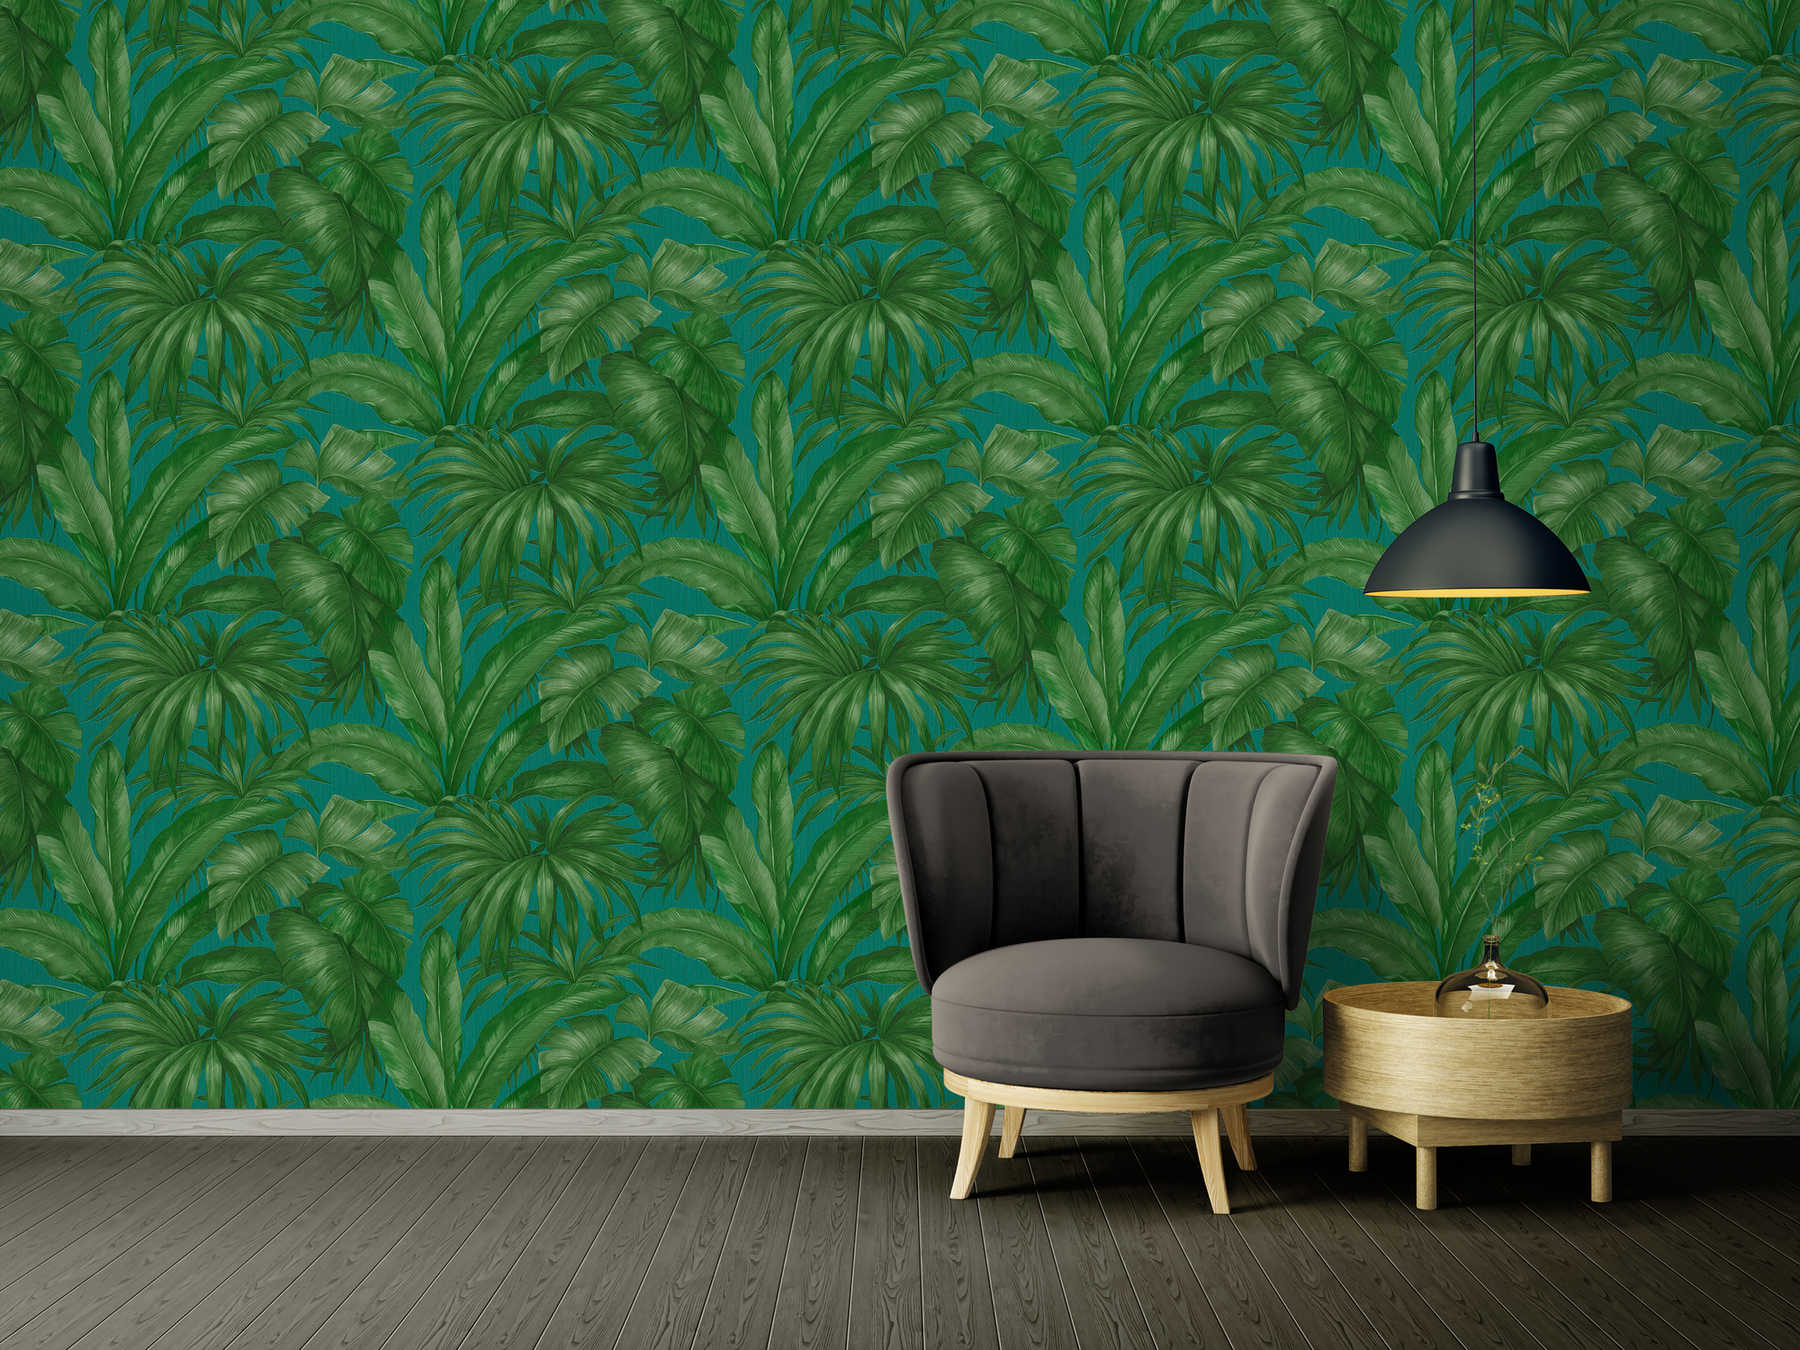             Jungle wallpaper VERSACE with palm leaves motif - green
        